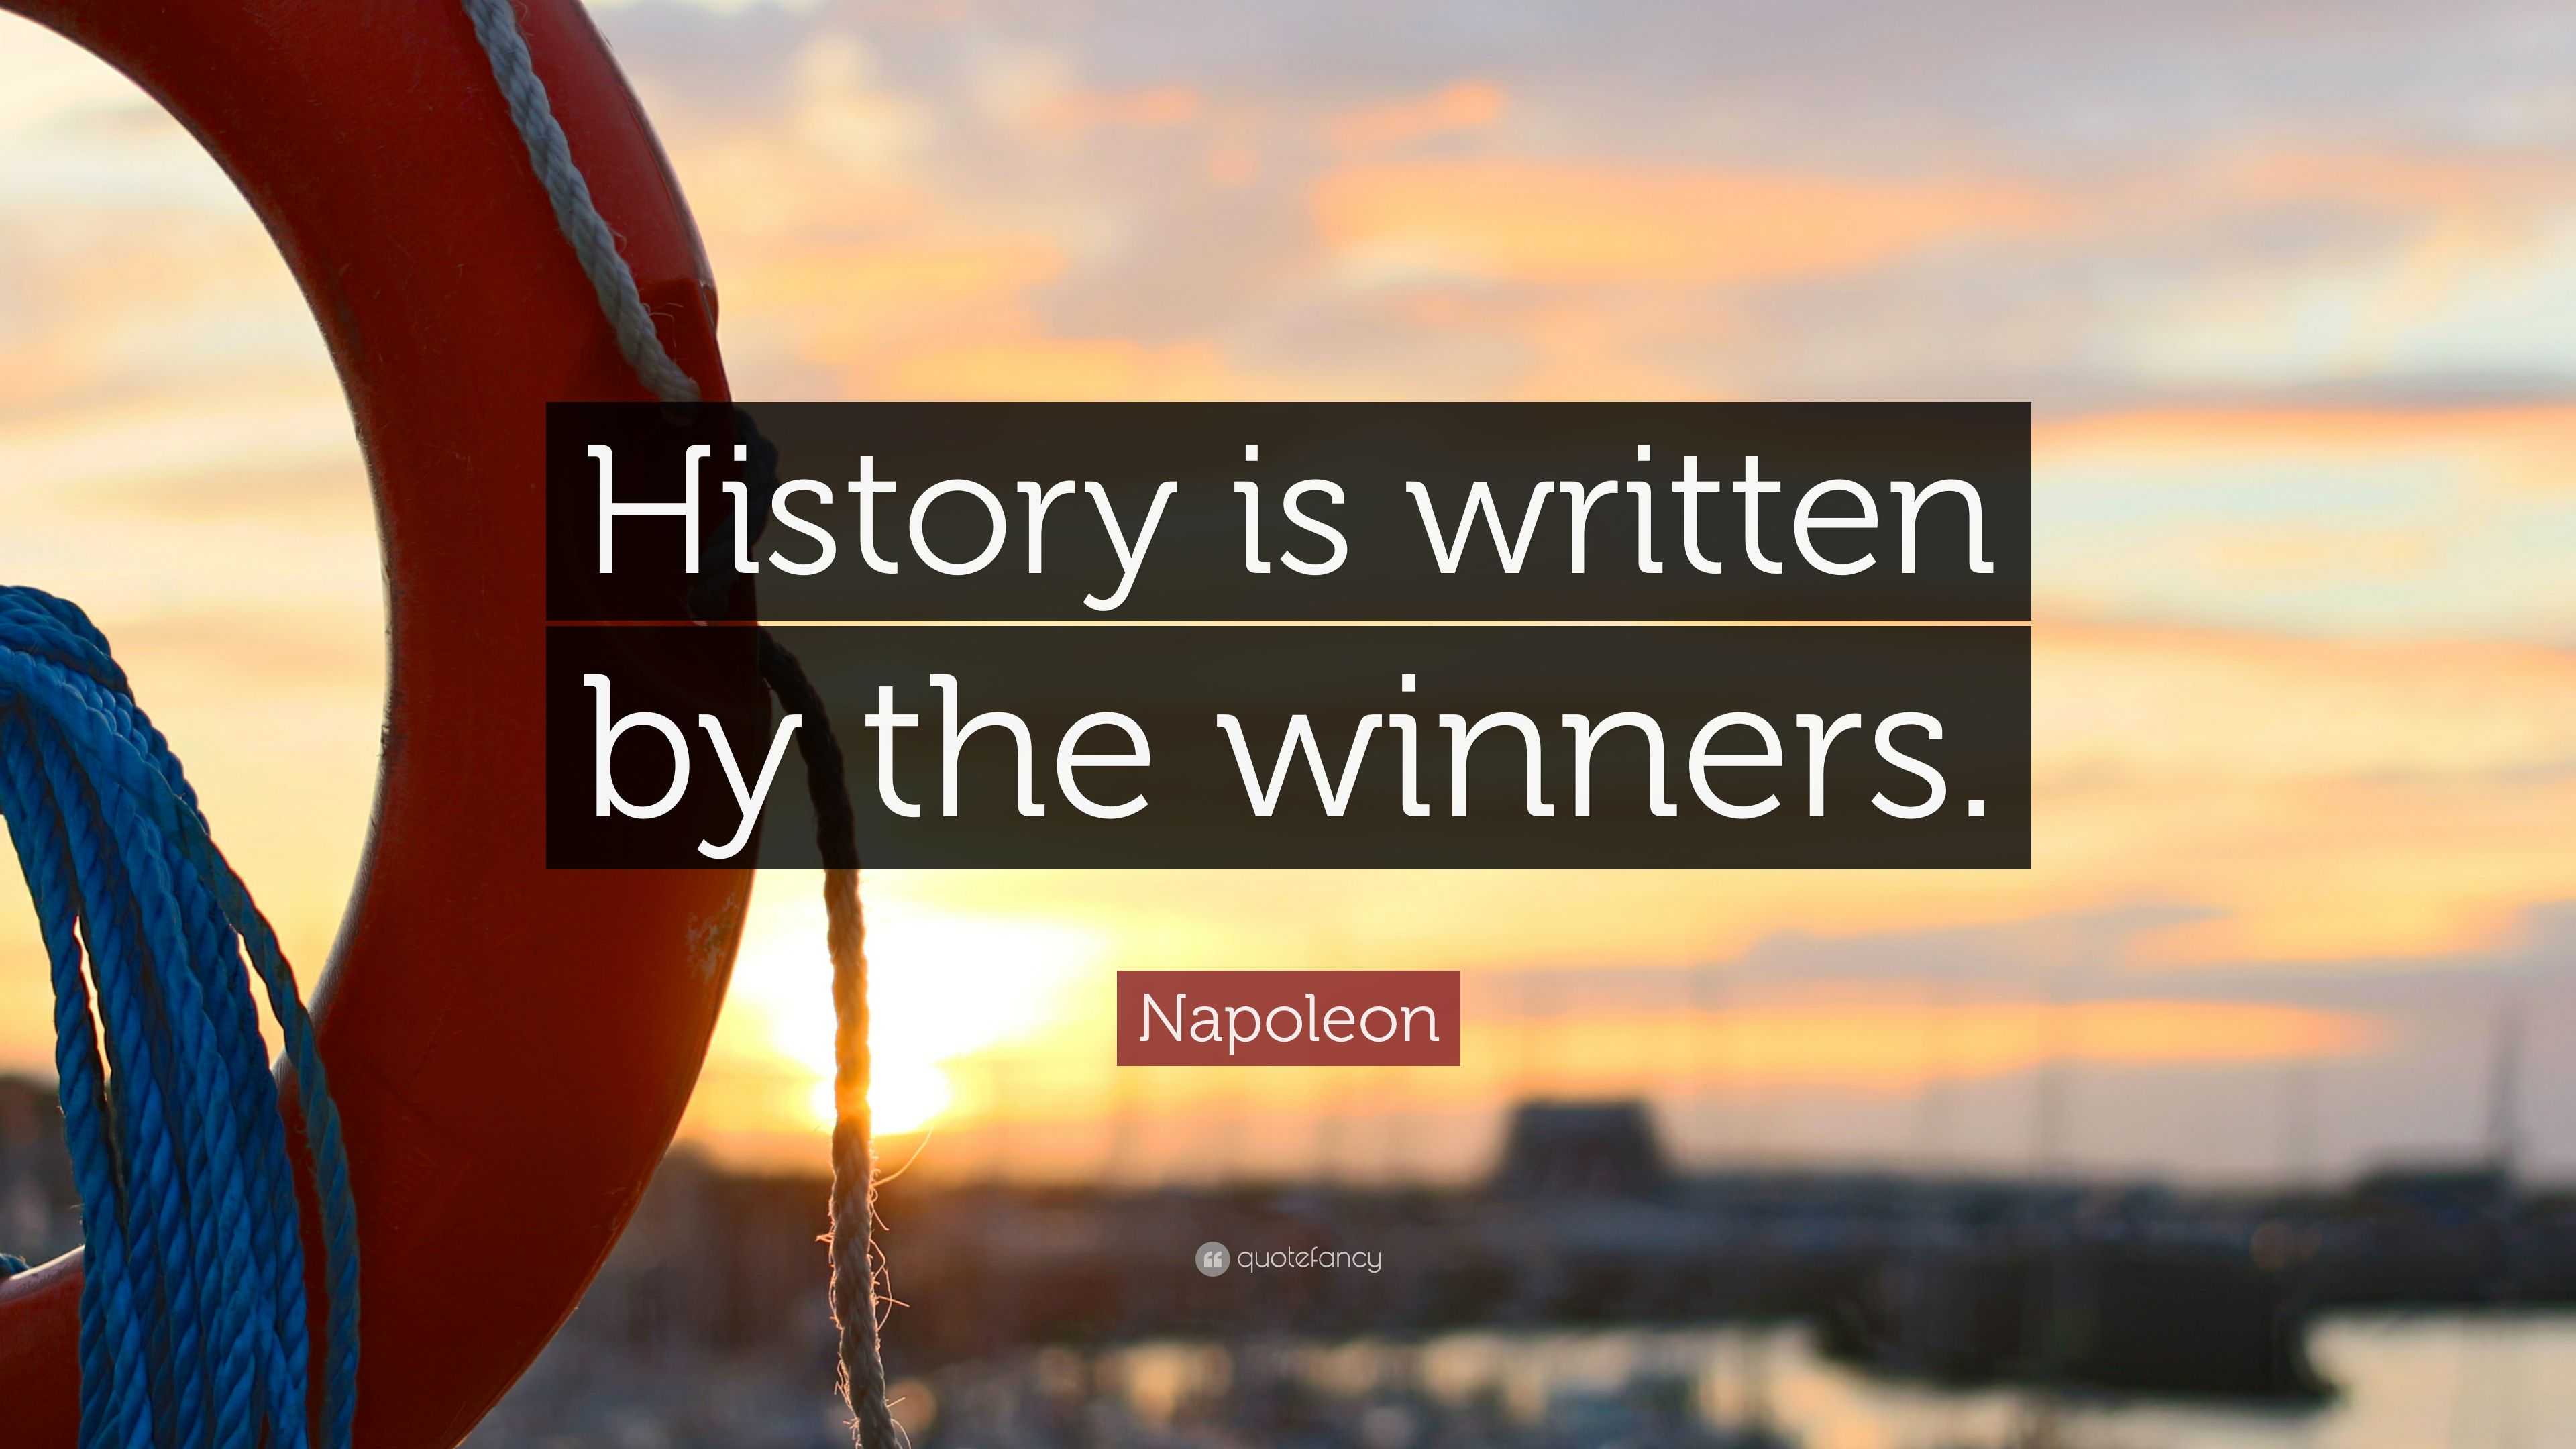 Napoleon Quote: “History is written by the winners.” (22 wallpapers